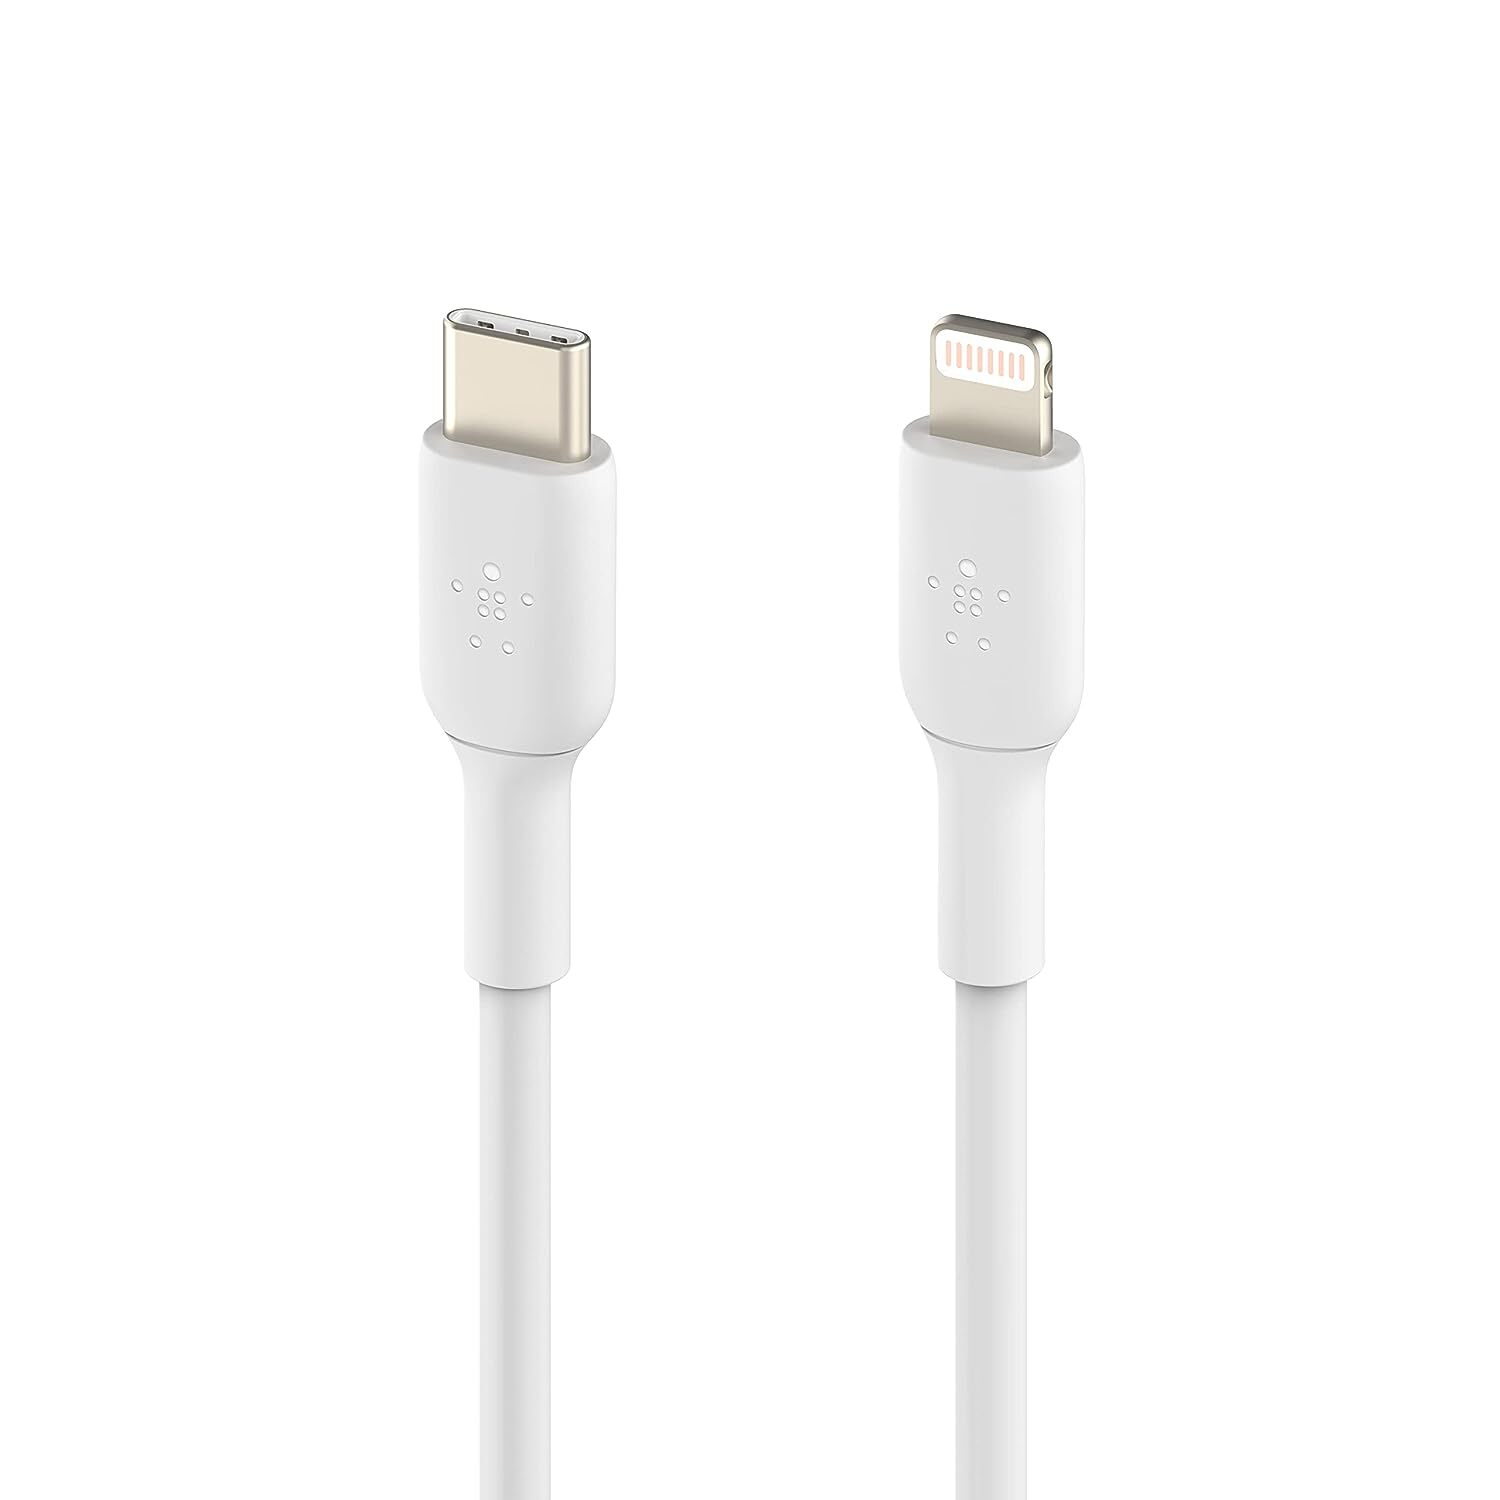 Belkin Apple Certified Lightning To Type C Cable, Fast Charging For Iphone, Ipad, Air Pods, 3.3 Feet (1 Meters) White